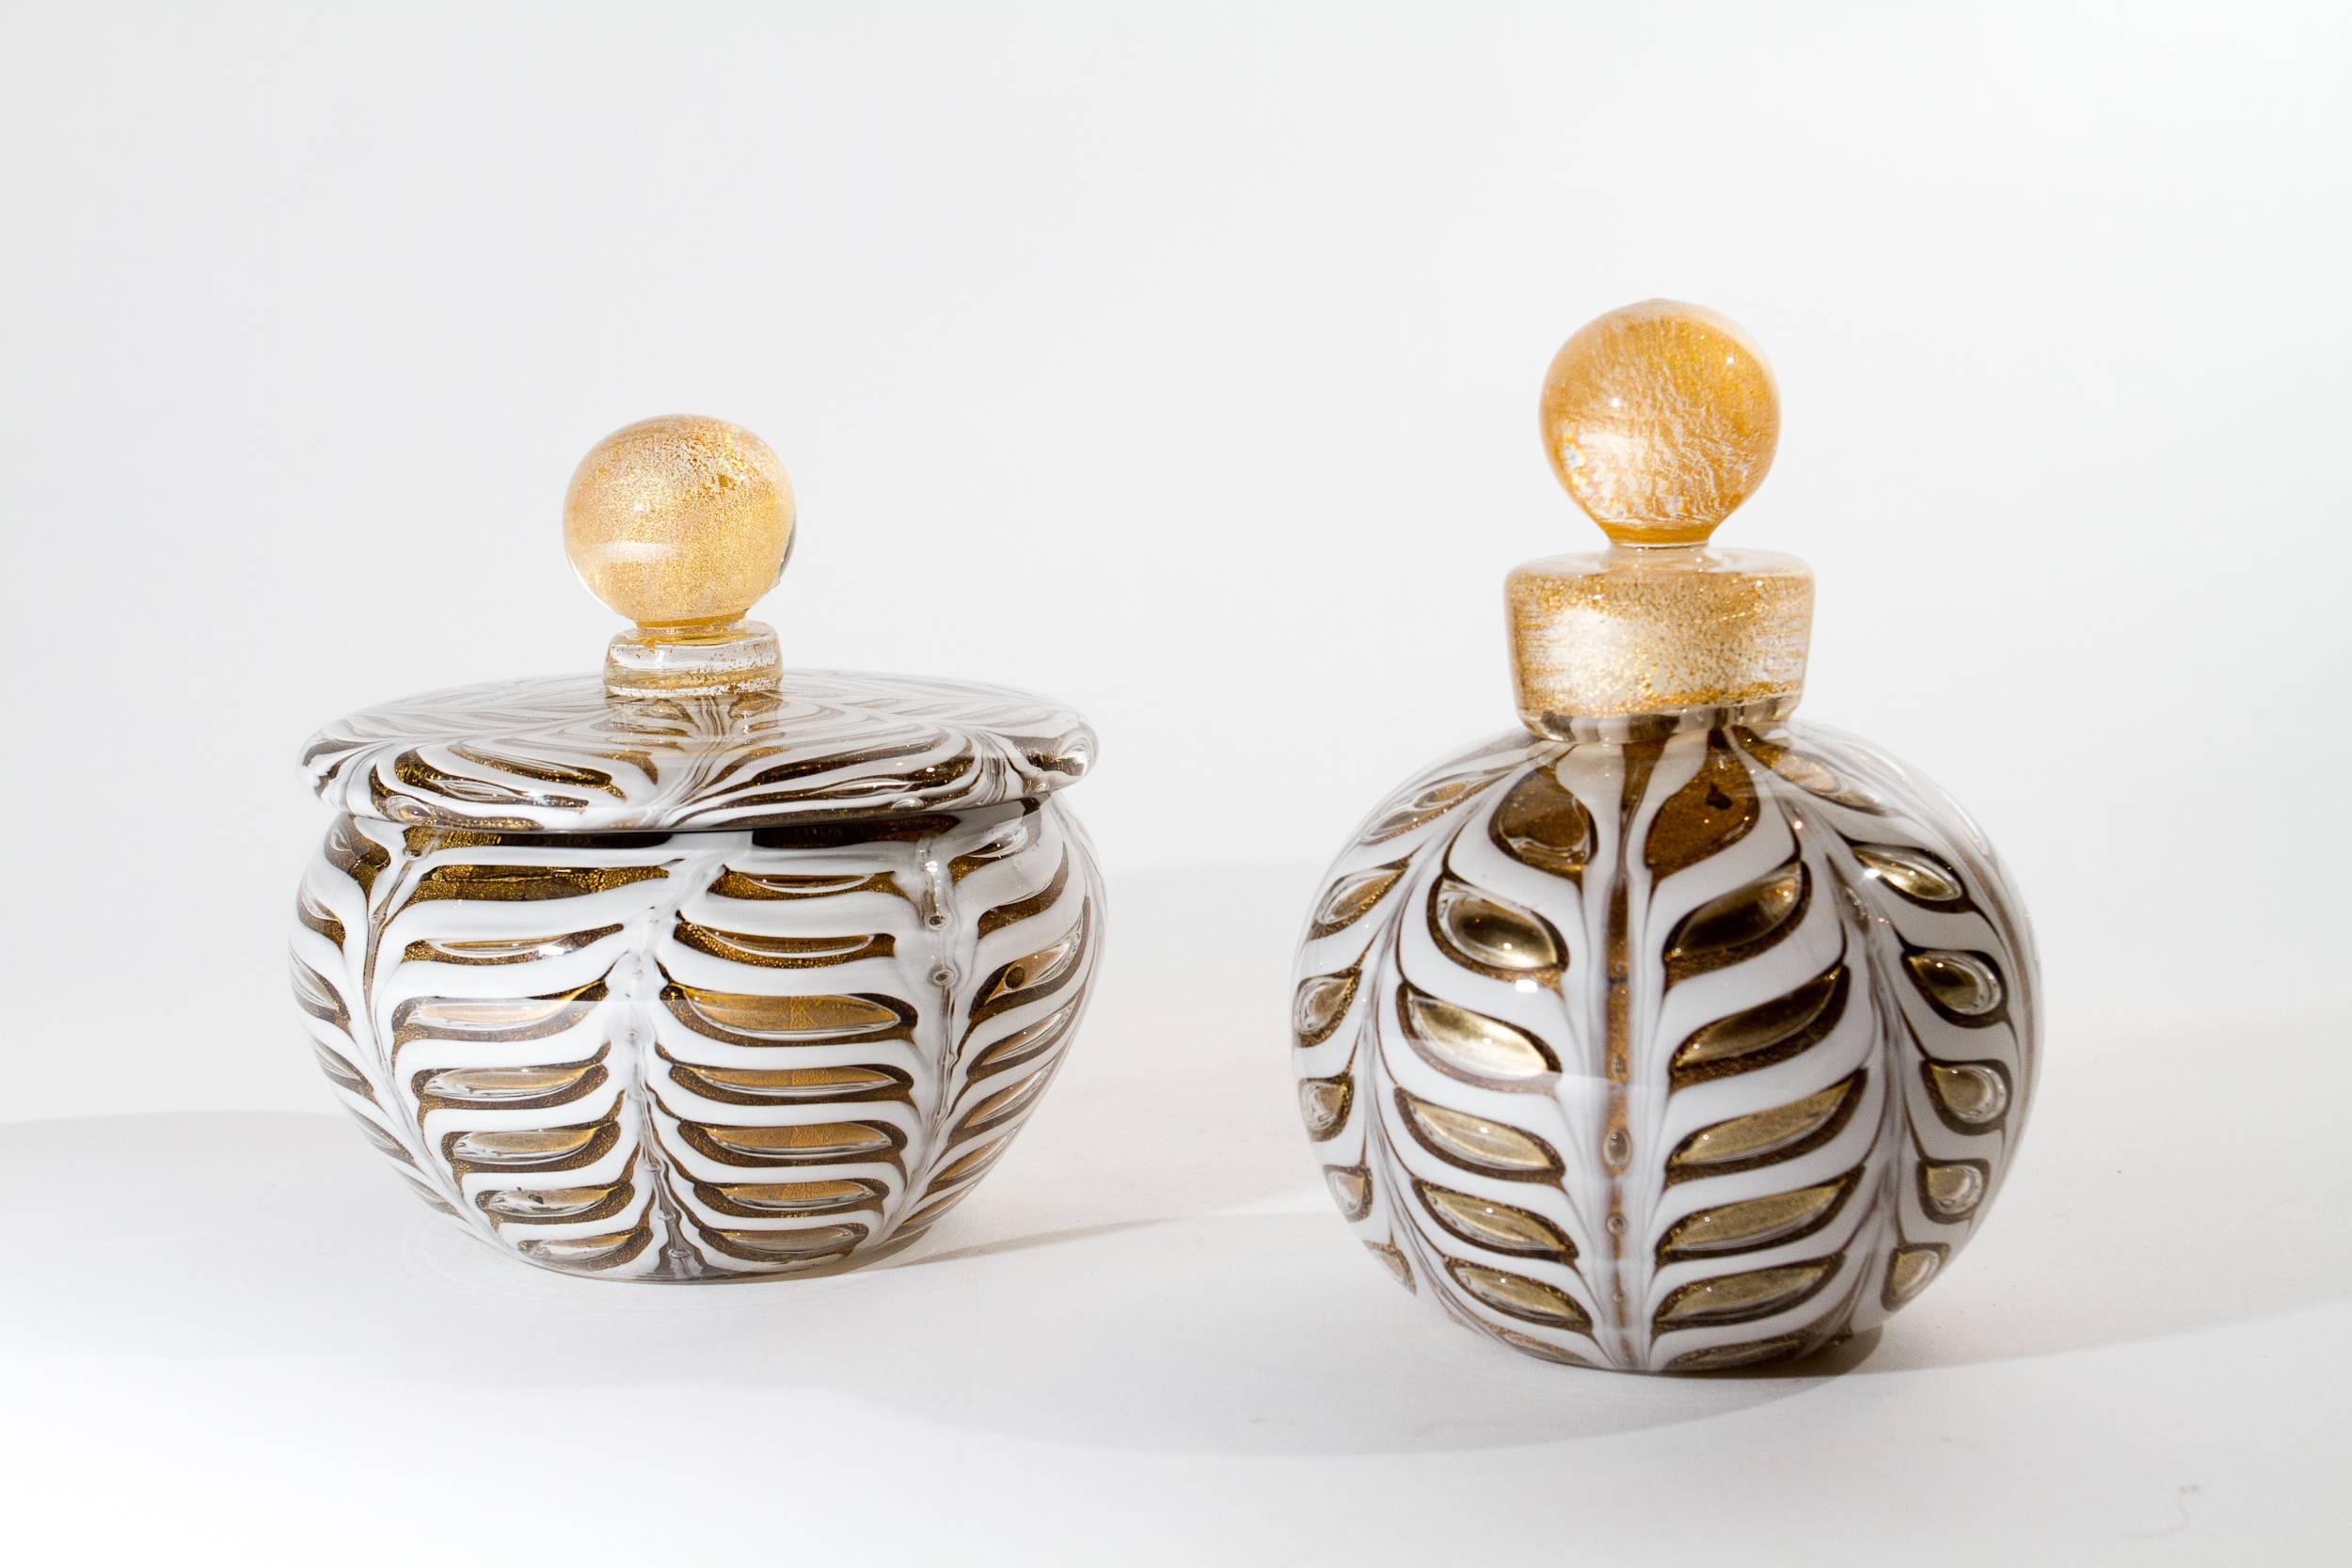 Blown glass perfume bottle and covered bowl with gold inclusions by Barovier & Toso.